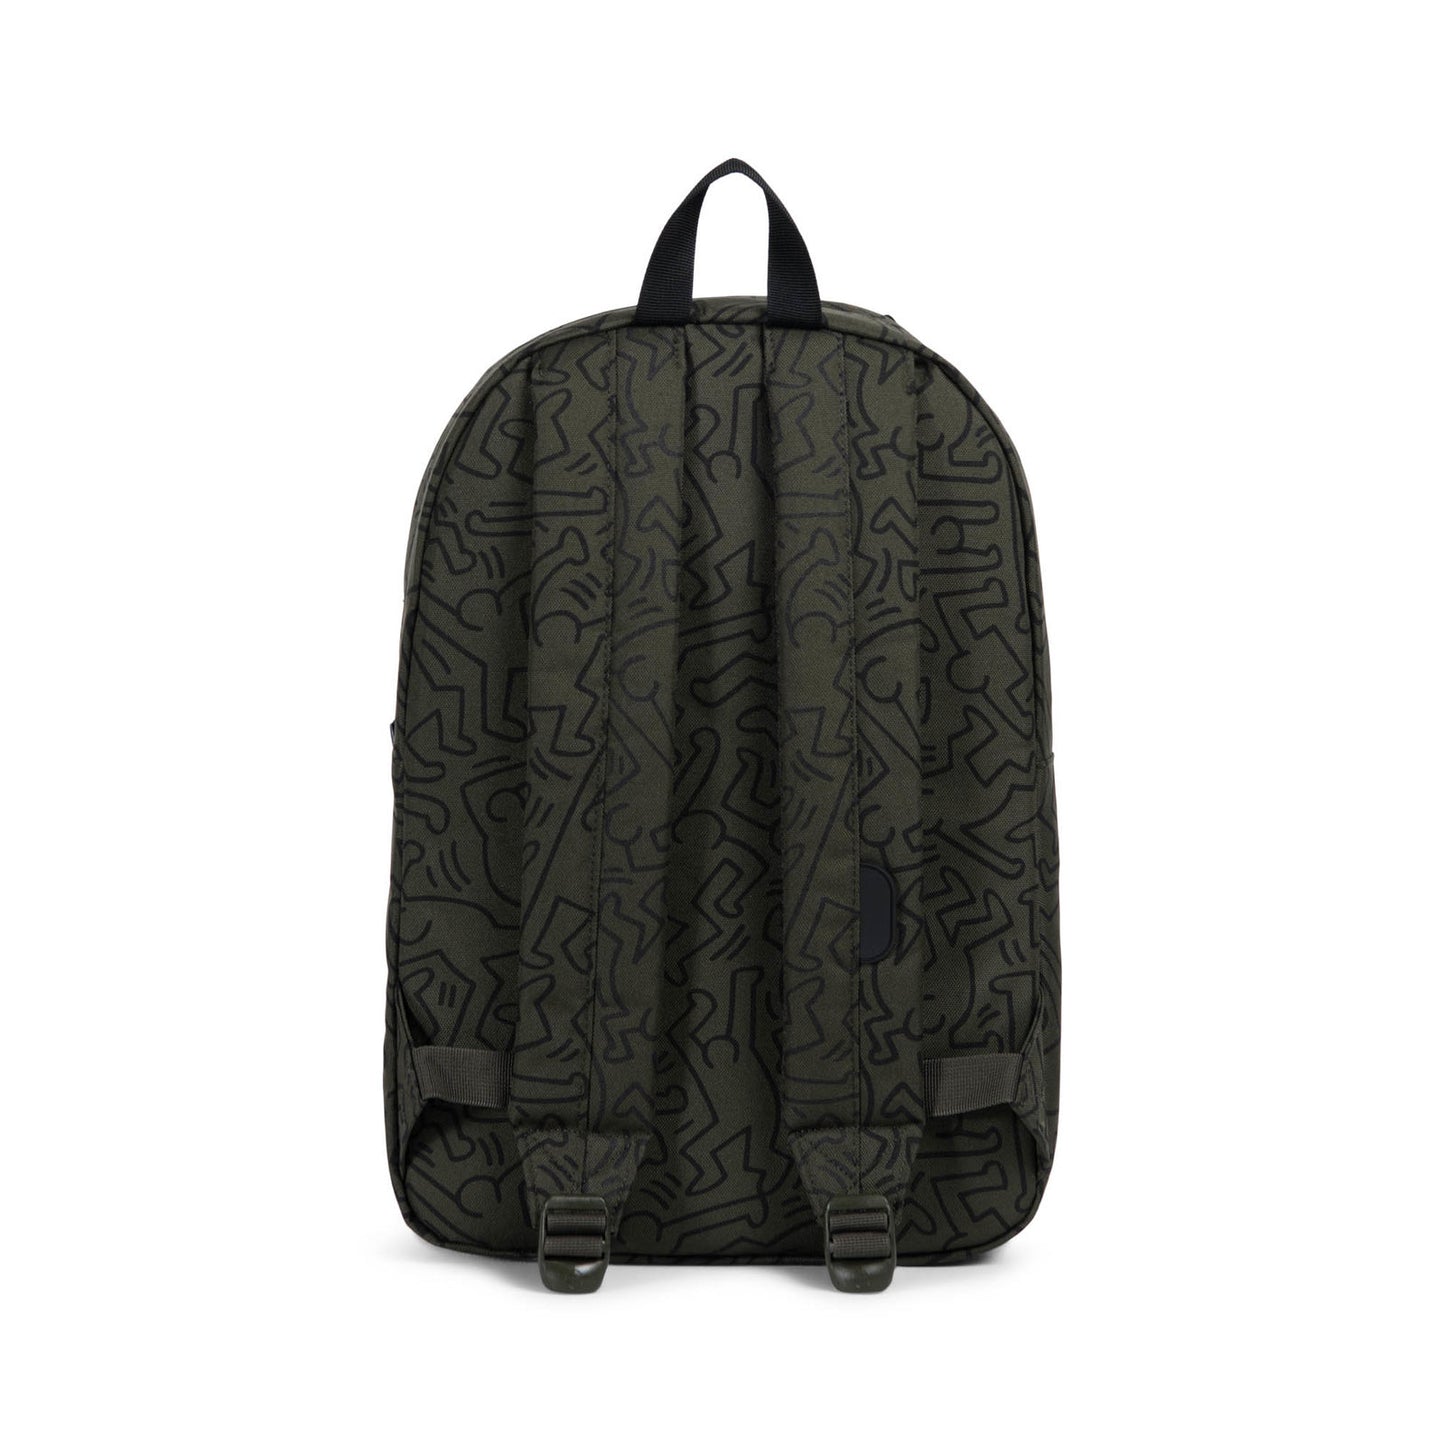 Herschel Supply Co. x Keith Haring - Winlaw Backpack, Forest Night